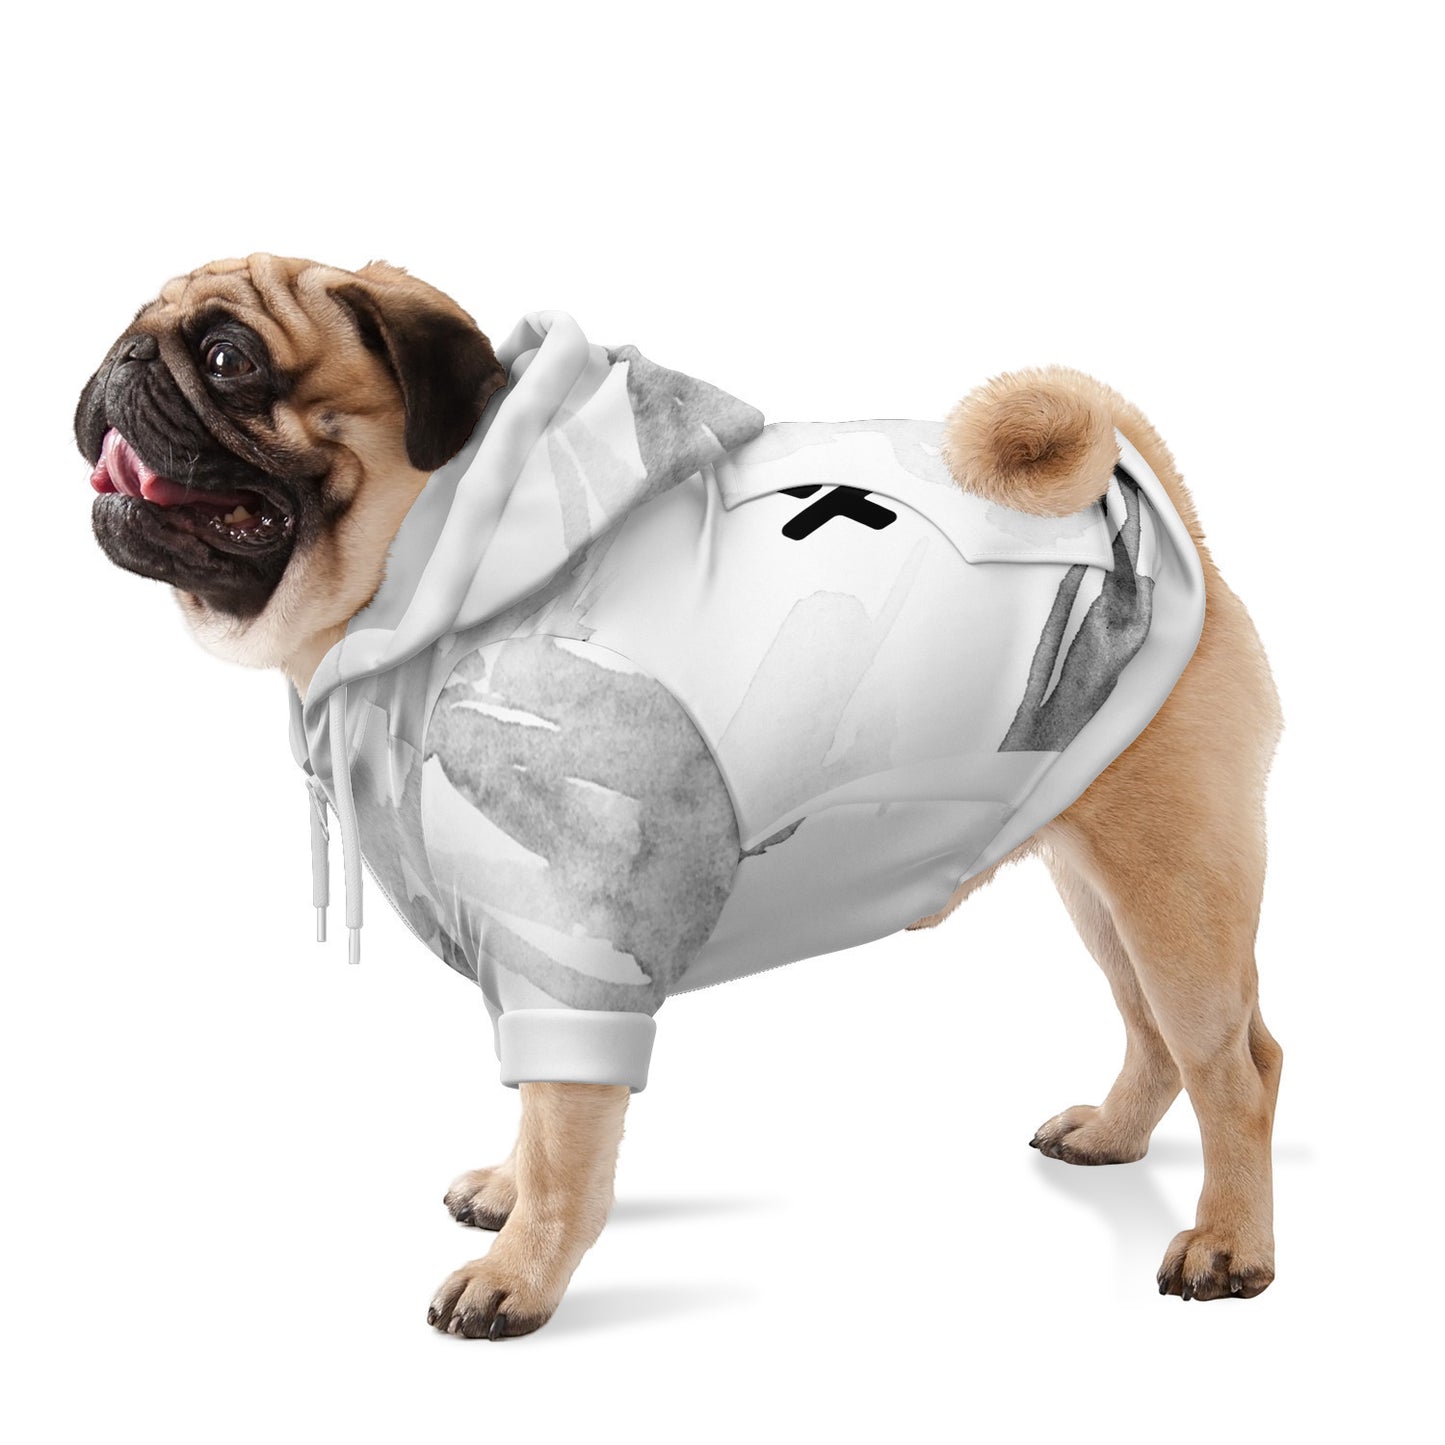 All Over Print Fashion Zip-up Dog Hoodie